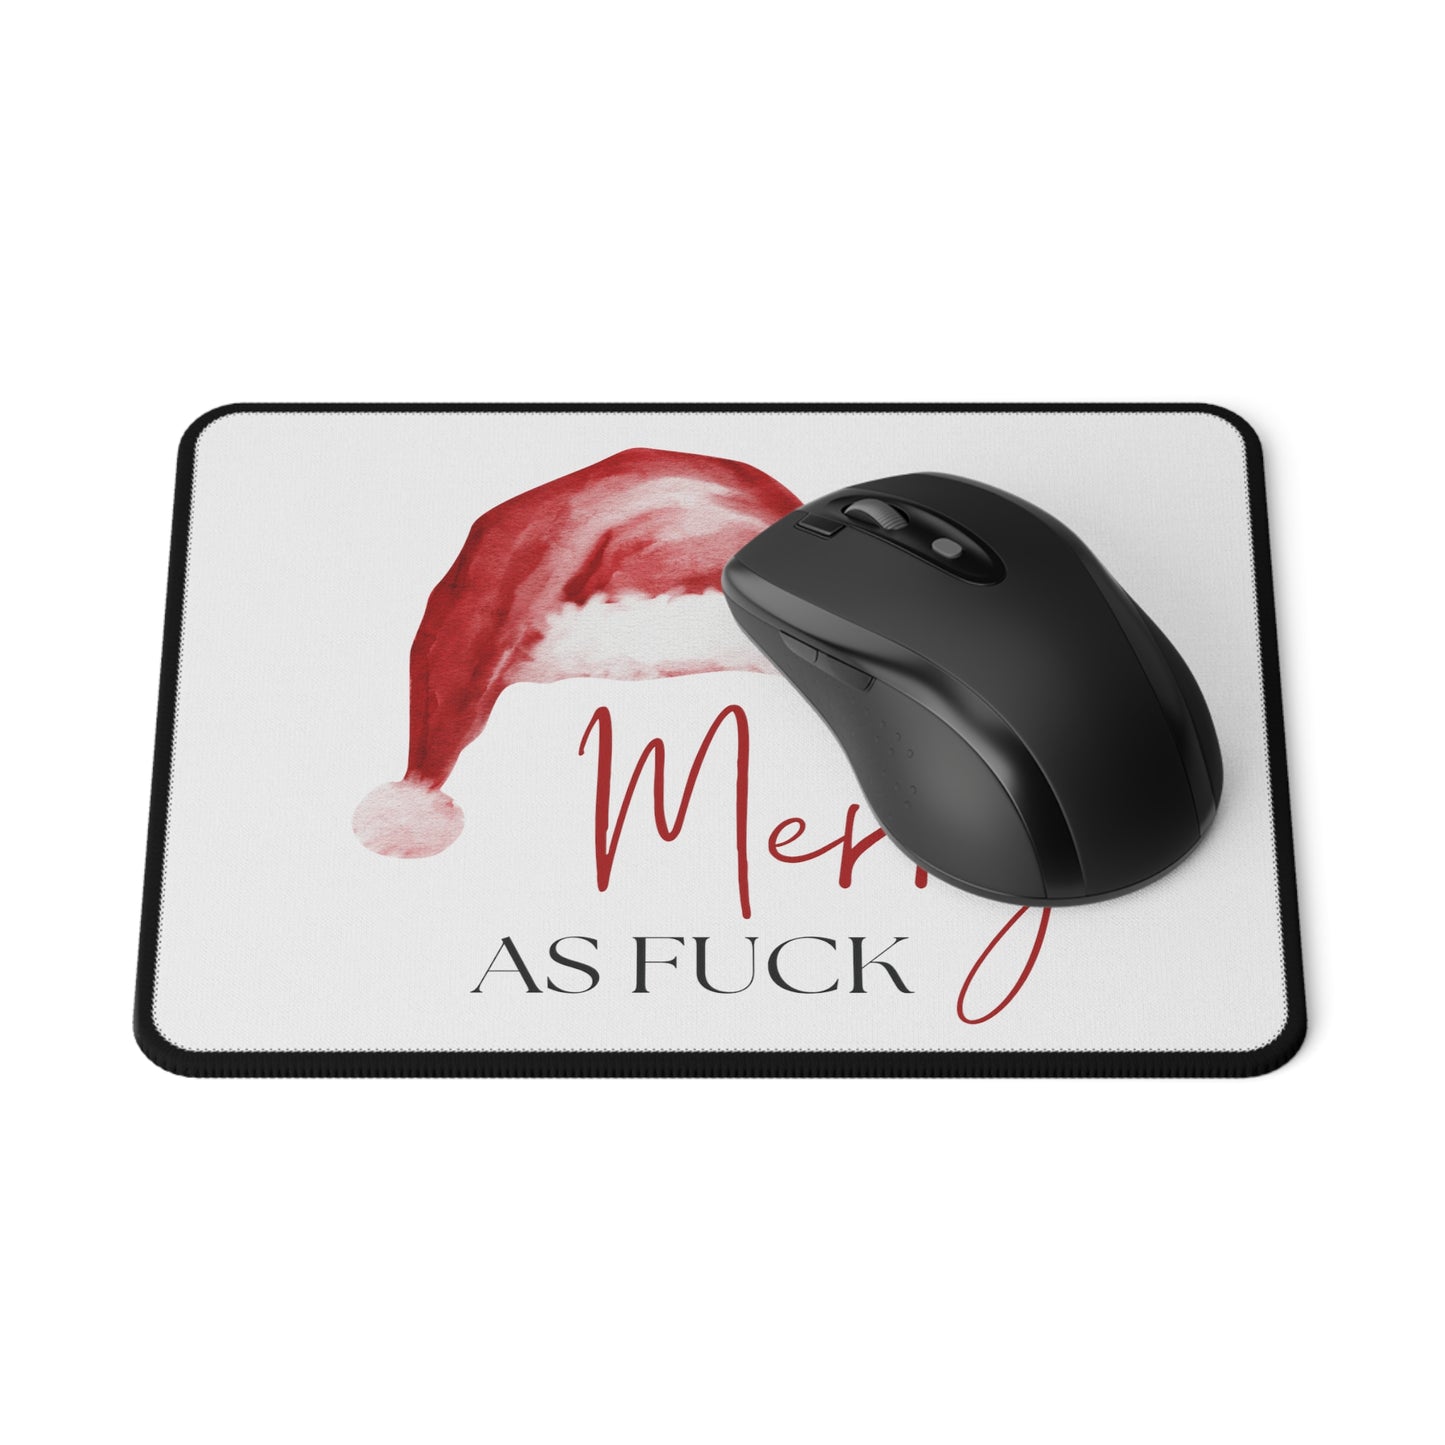 Merry As Fuck  - Mouse Pad